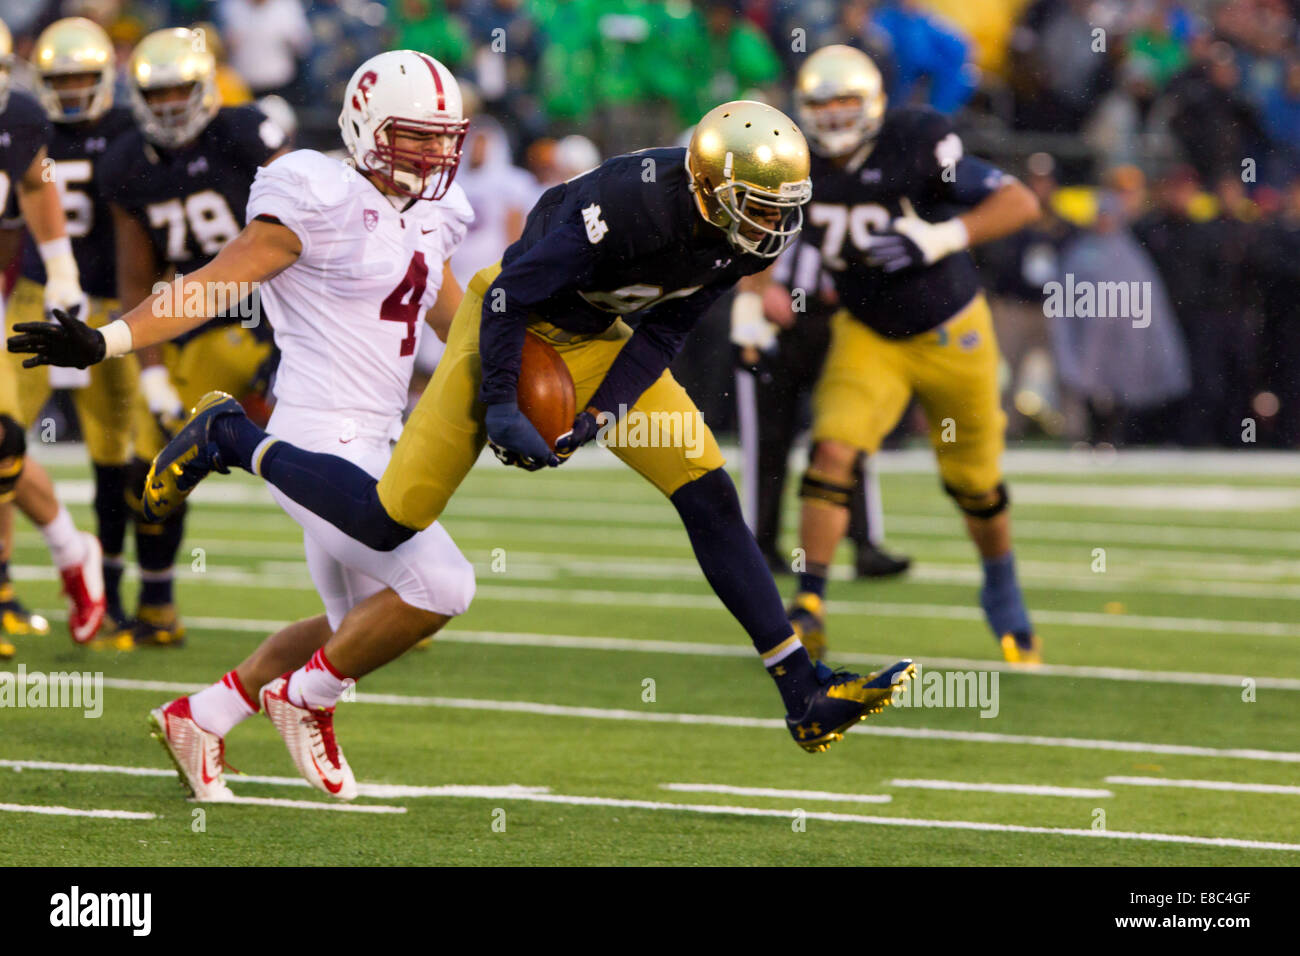 South Bend, Indiana, USA. 4th Oct, 2014. Notre Dame WR COREY ROBINSON (88) makes a juggling catch against Stanford ILB BLAKE MARTINEZ (4) during the fourth quarter. The Notre Dame Fighting Irish beat the Stanford Cardinal 17-14 at Notre Dame Stadium in South Bend, Indiana. Credit:  Frank Jansky/ZUMA Wire/Alamy Live News Stock Photo